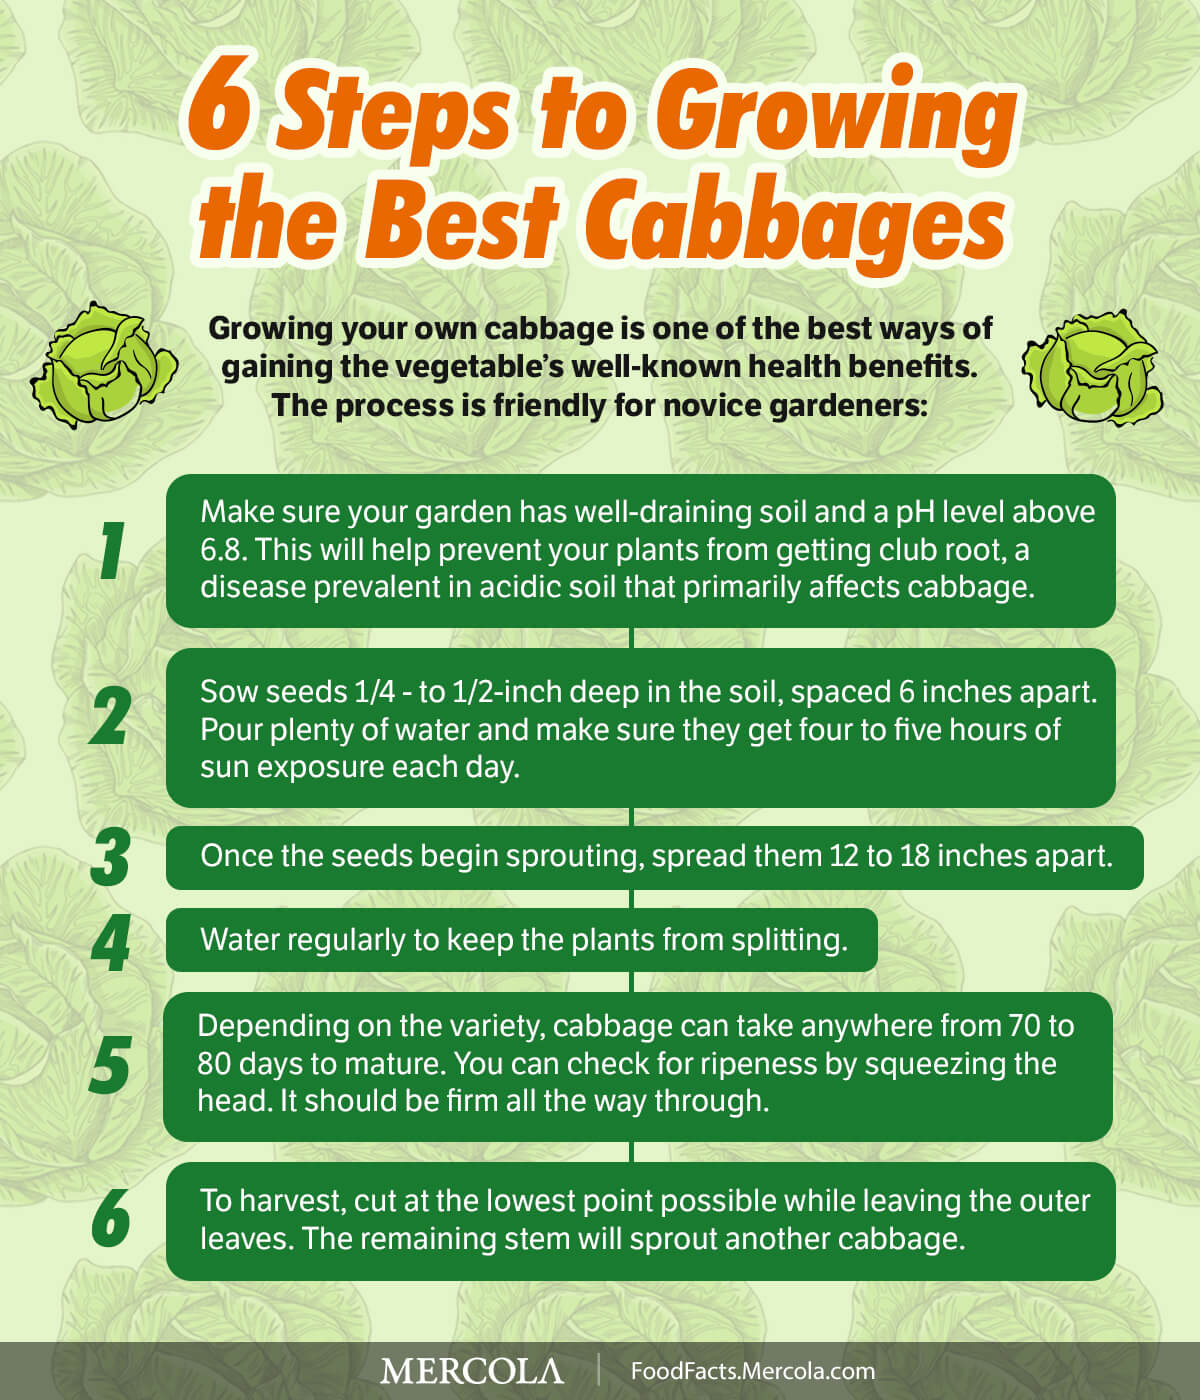 6 Steps to Growing the Best Cabbages